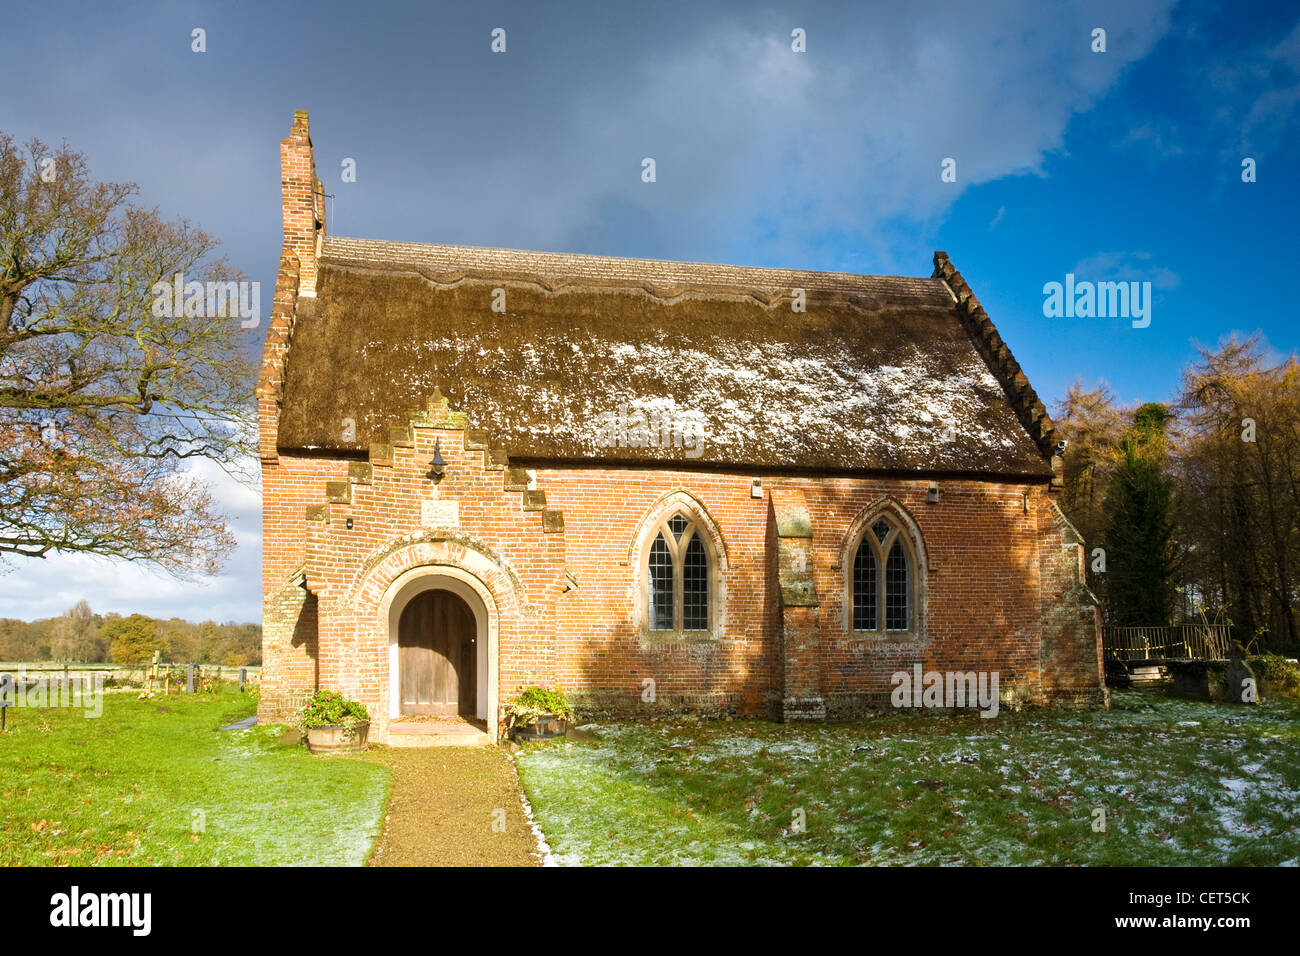 Light snow on the thatched roof of the 17th century church, St Peter, Hoveton. Stock Photo